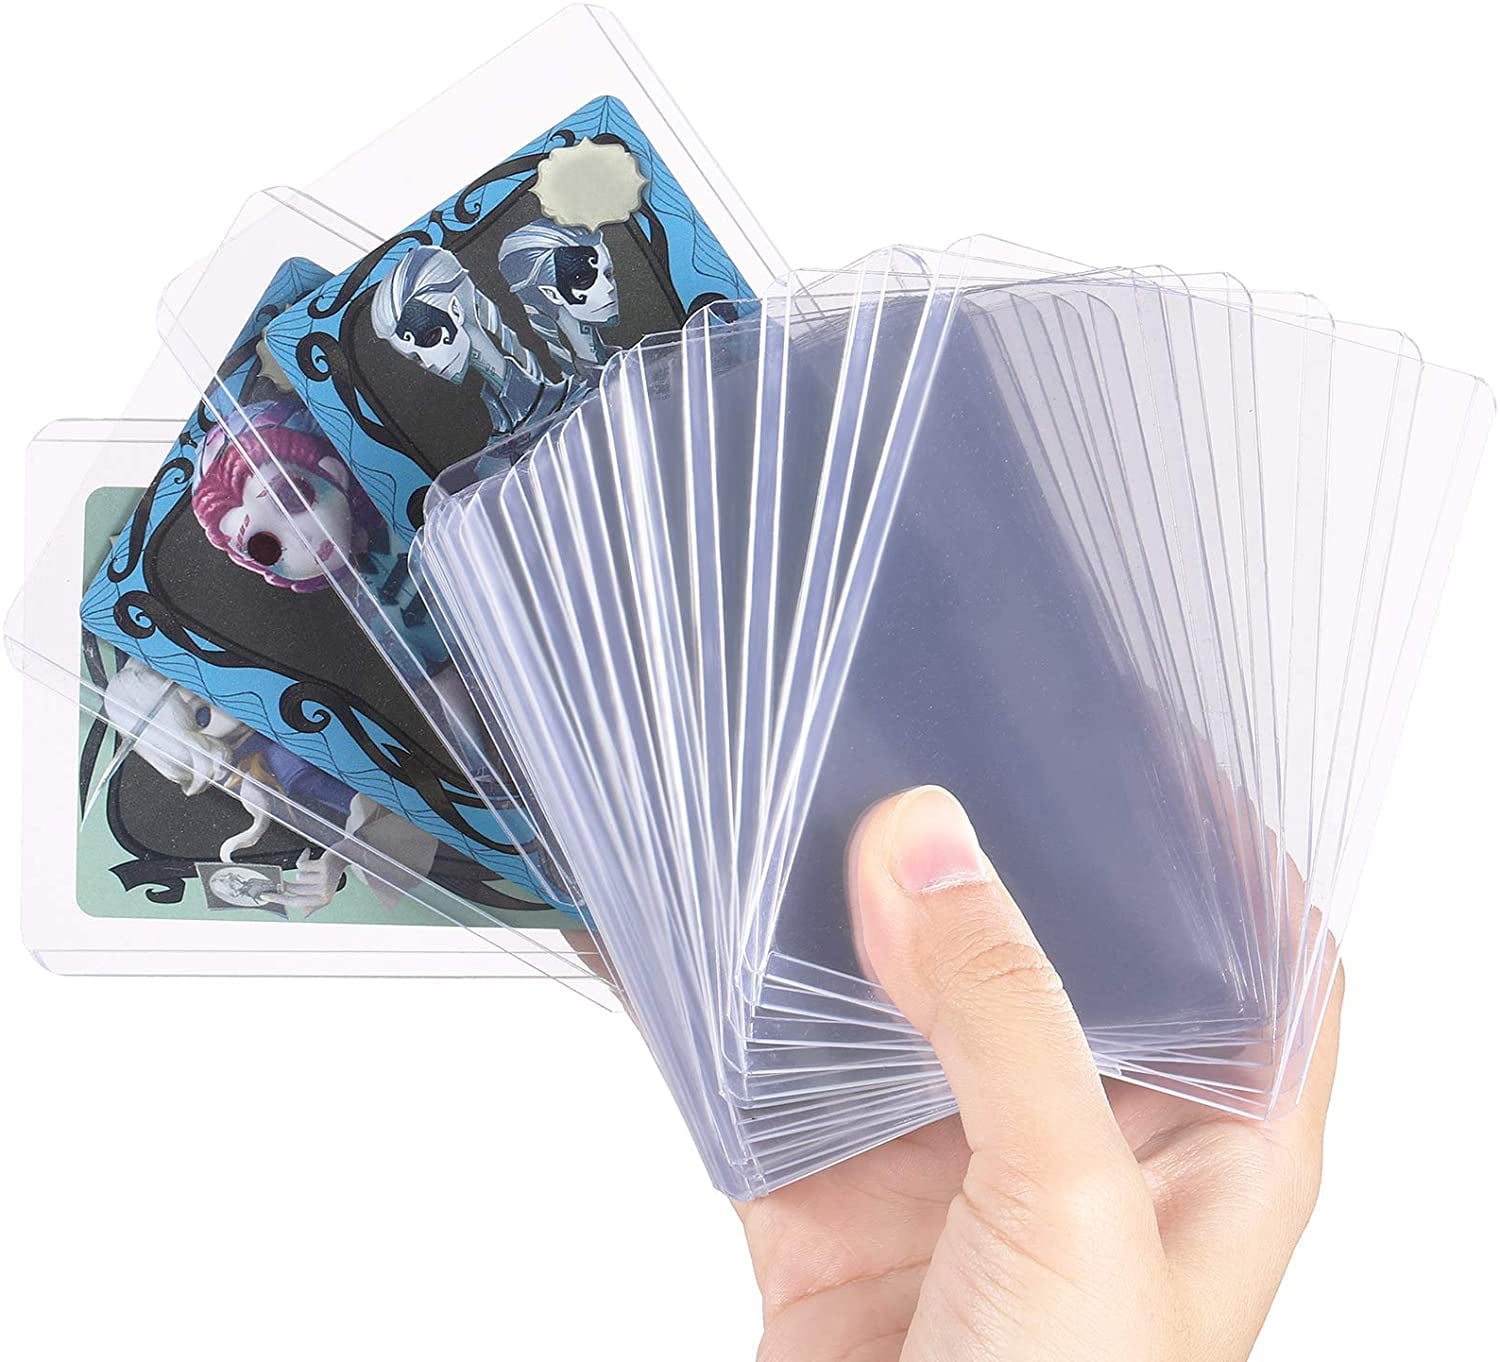 100 Pieces Zonon Top Loader Card Protectors and Standard Size Card Sleeves Clear Card Protectors for Trading Cards